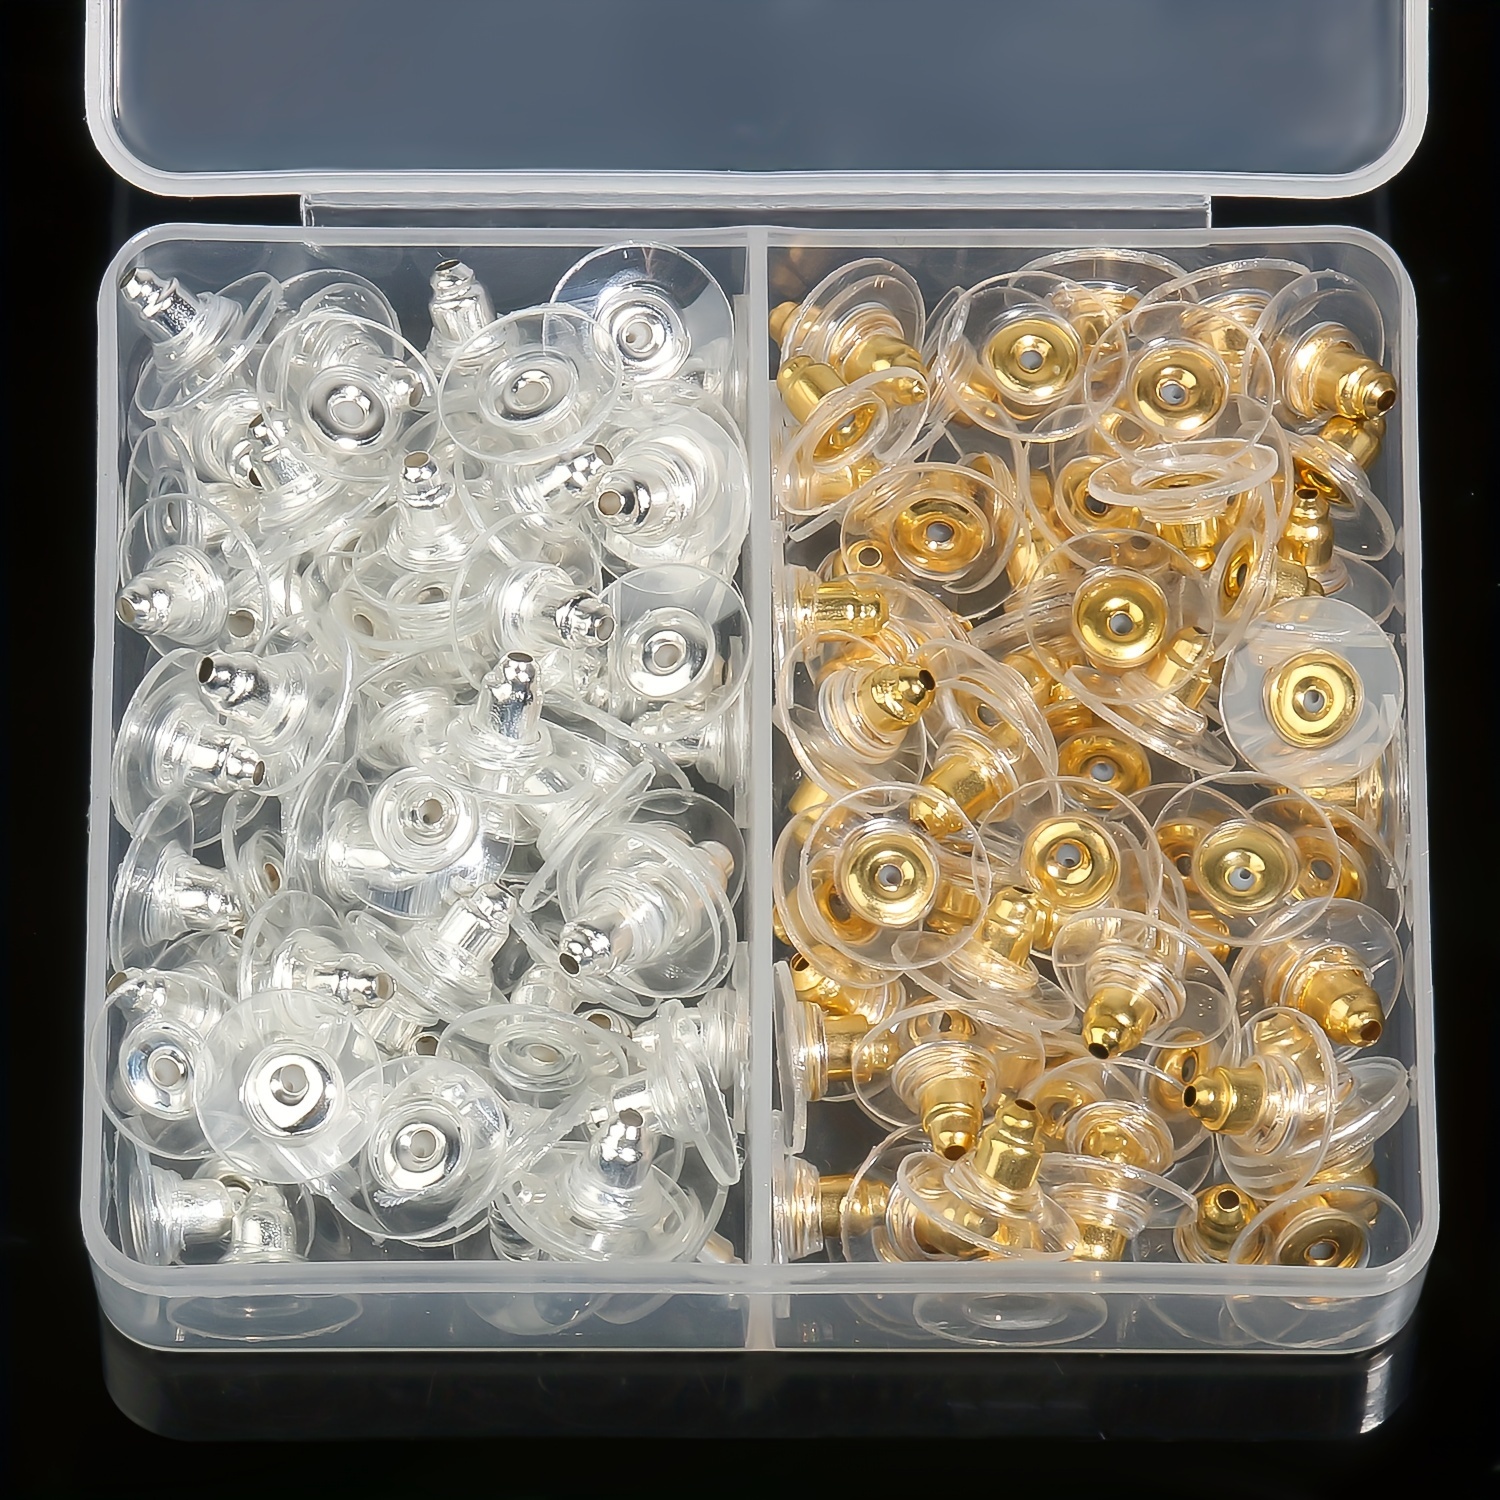 

150 Pieces Bullet Clutch Earring Backs For Studs With Pad Rubber Earring Stoppers Pierced Safety Earring Pin Backs Diy Jewelry Making Supplies, Golden Diy